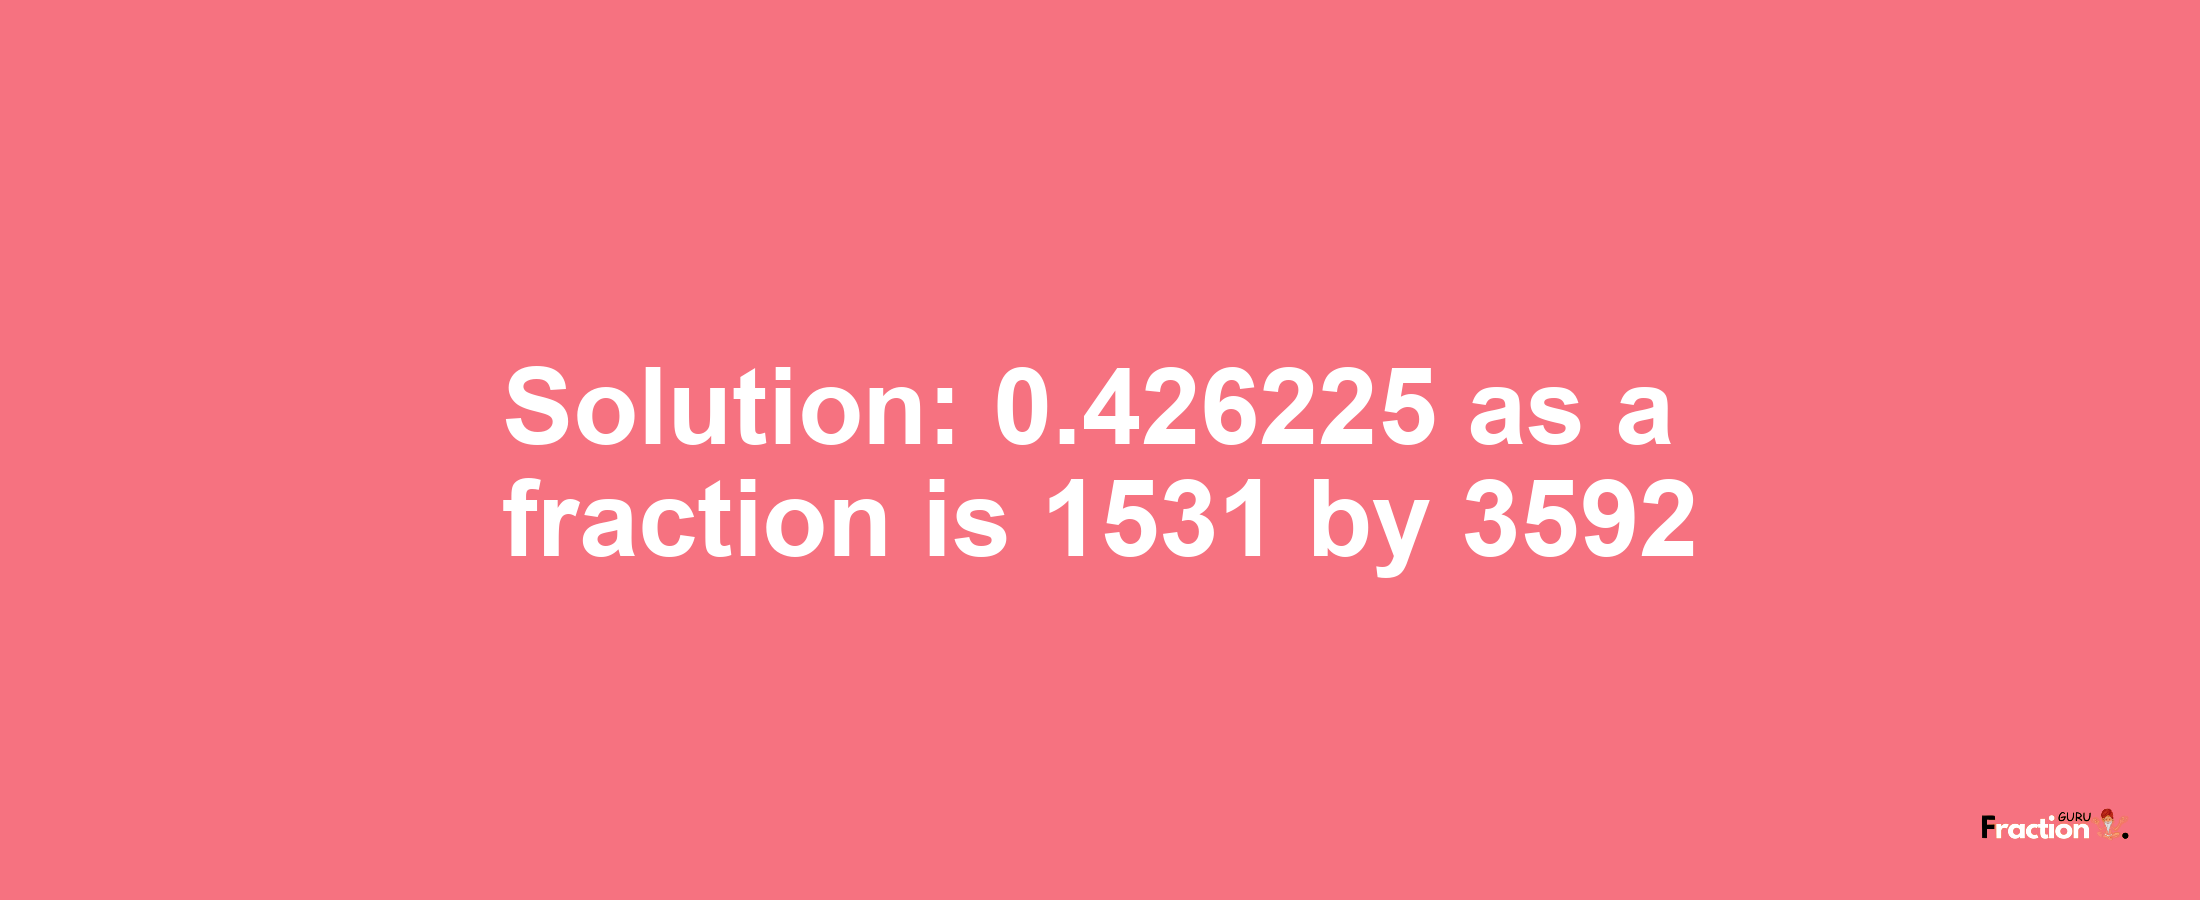 Solution:0.426225 as a fraction is 1531/3592